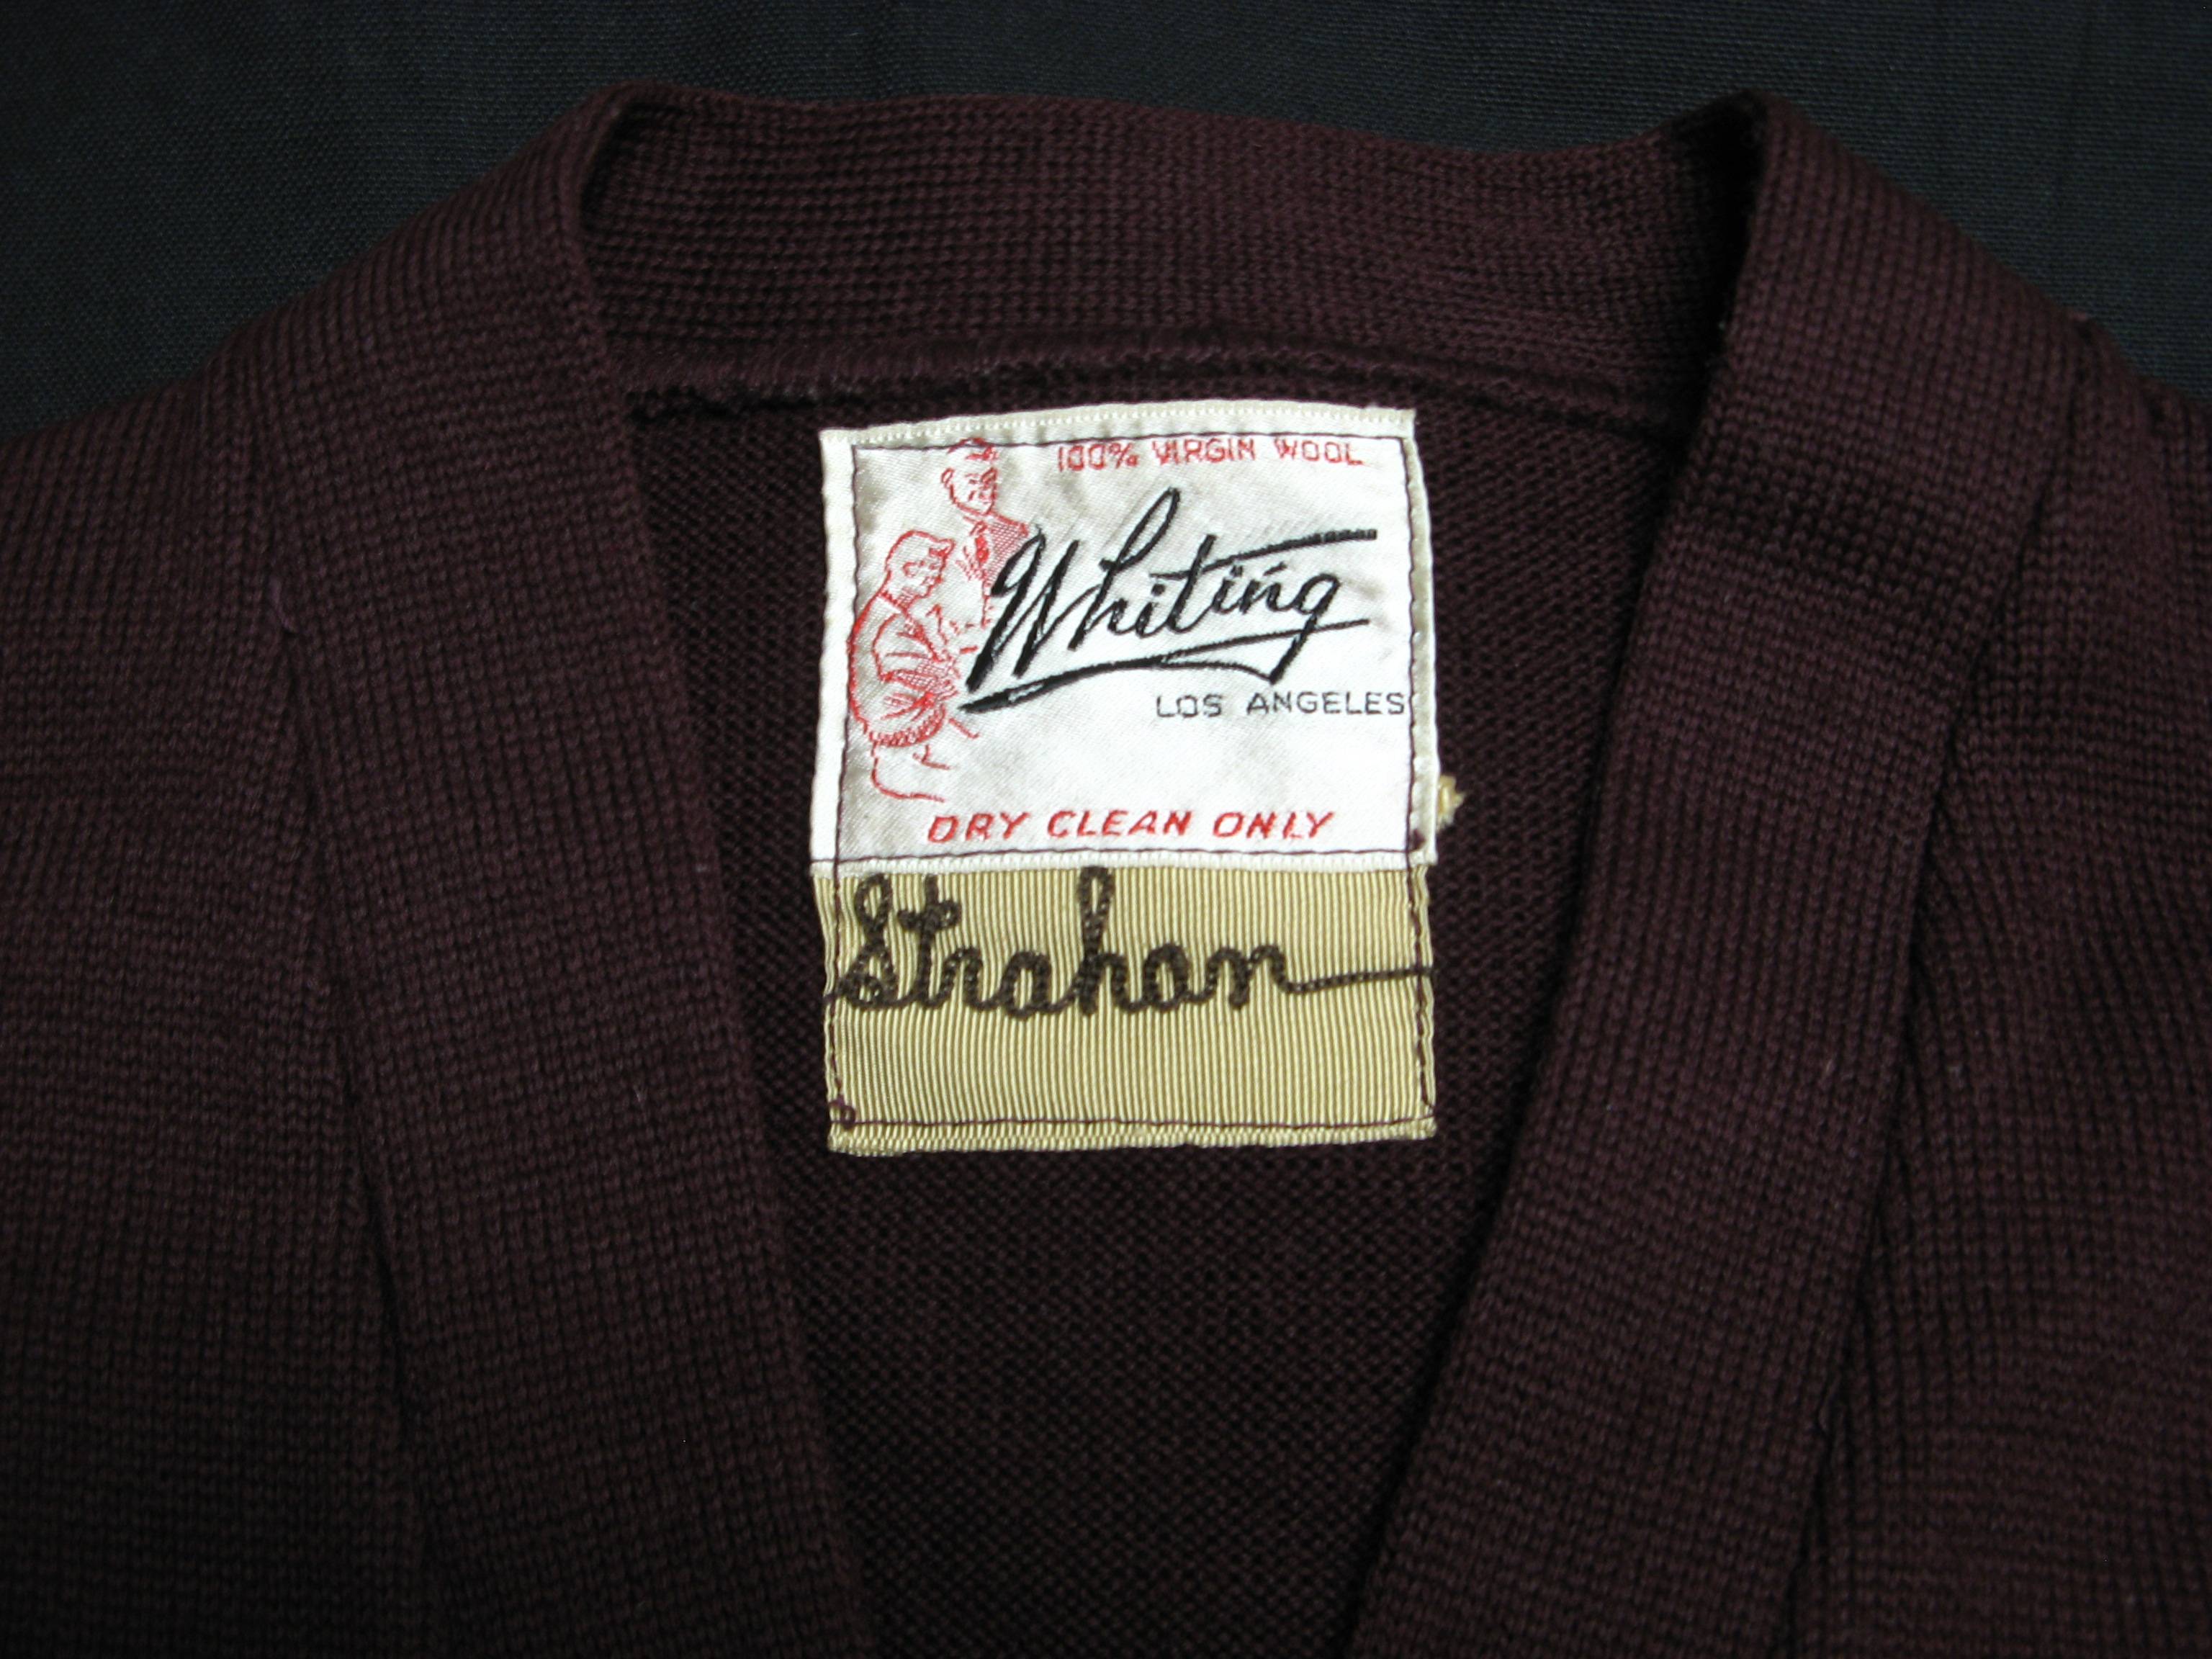 Photograph of the inside label of the sweater with the name "Strahan" sewn inside.